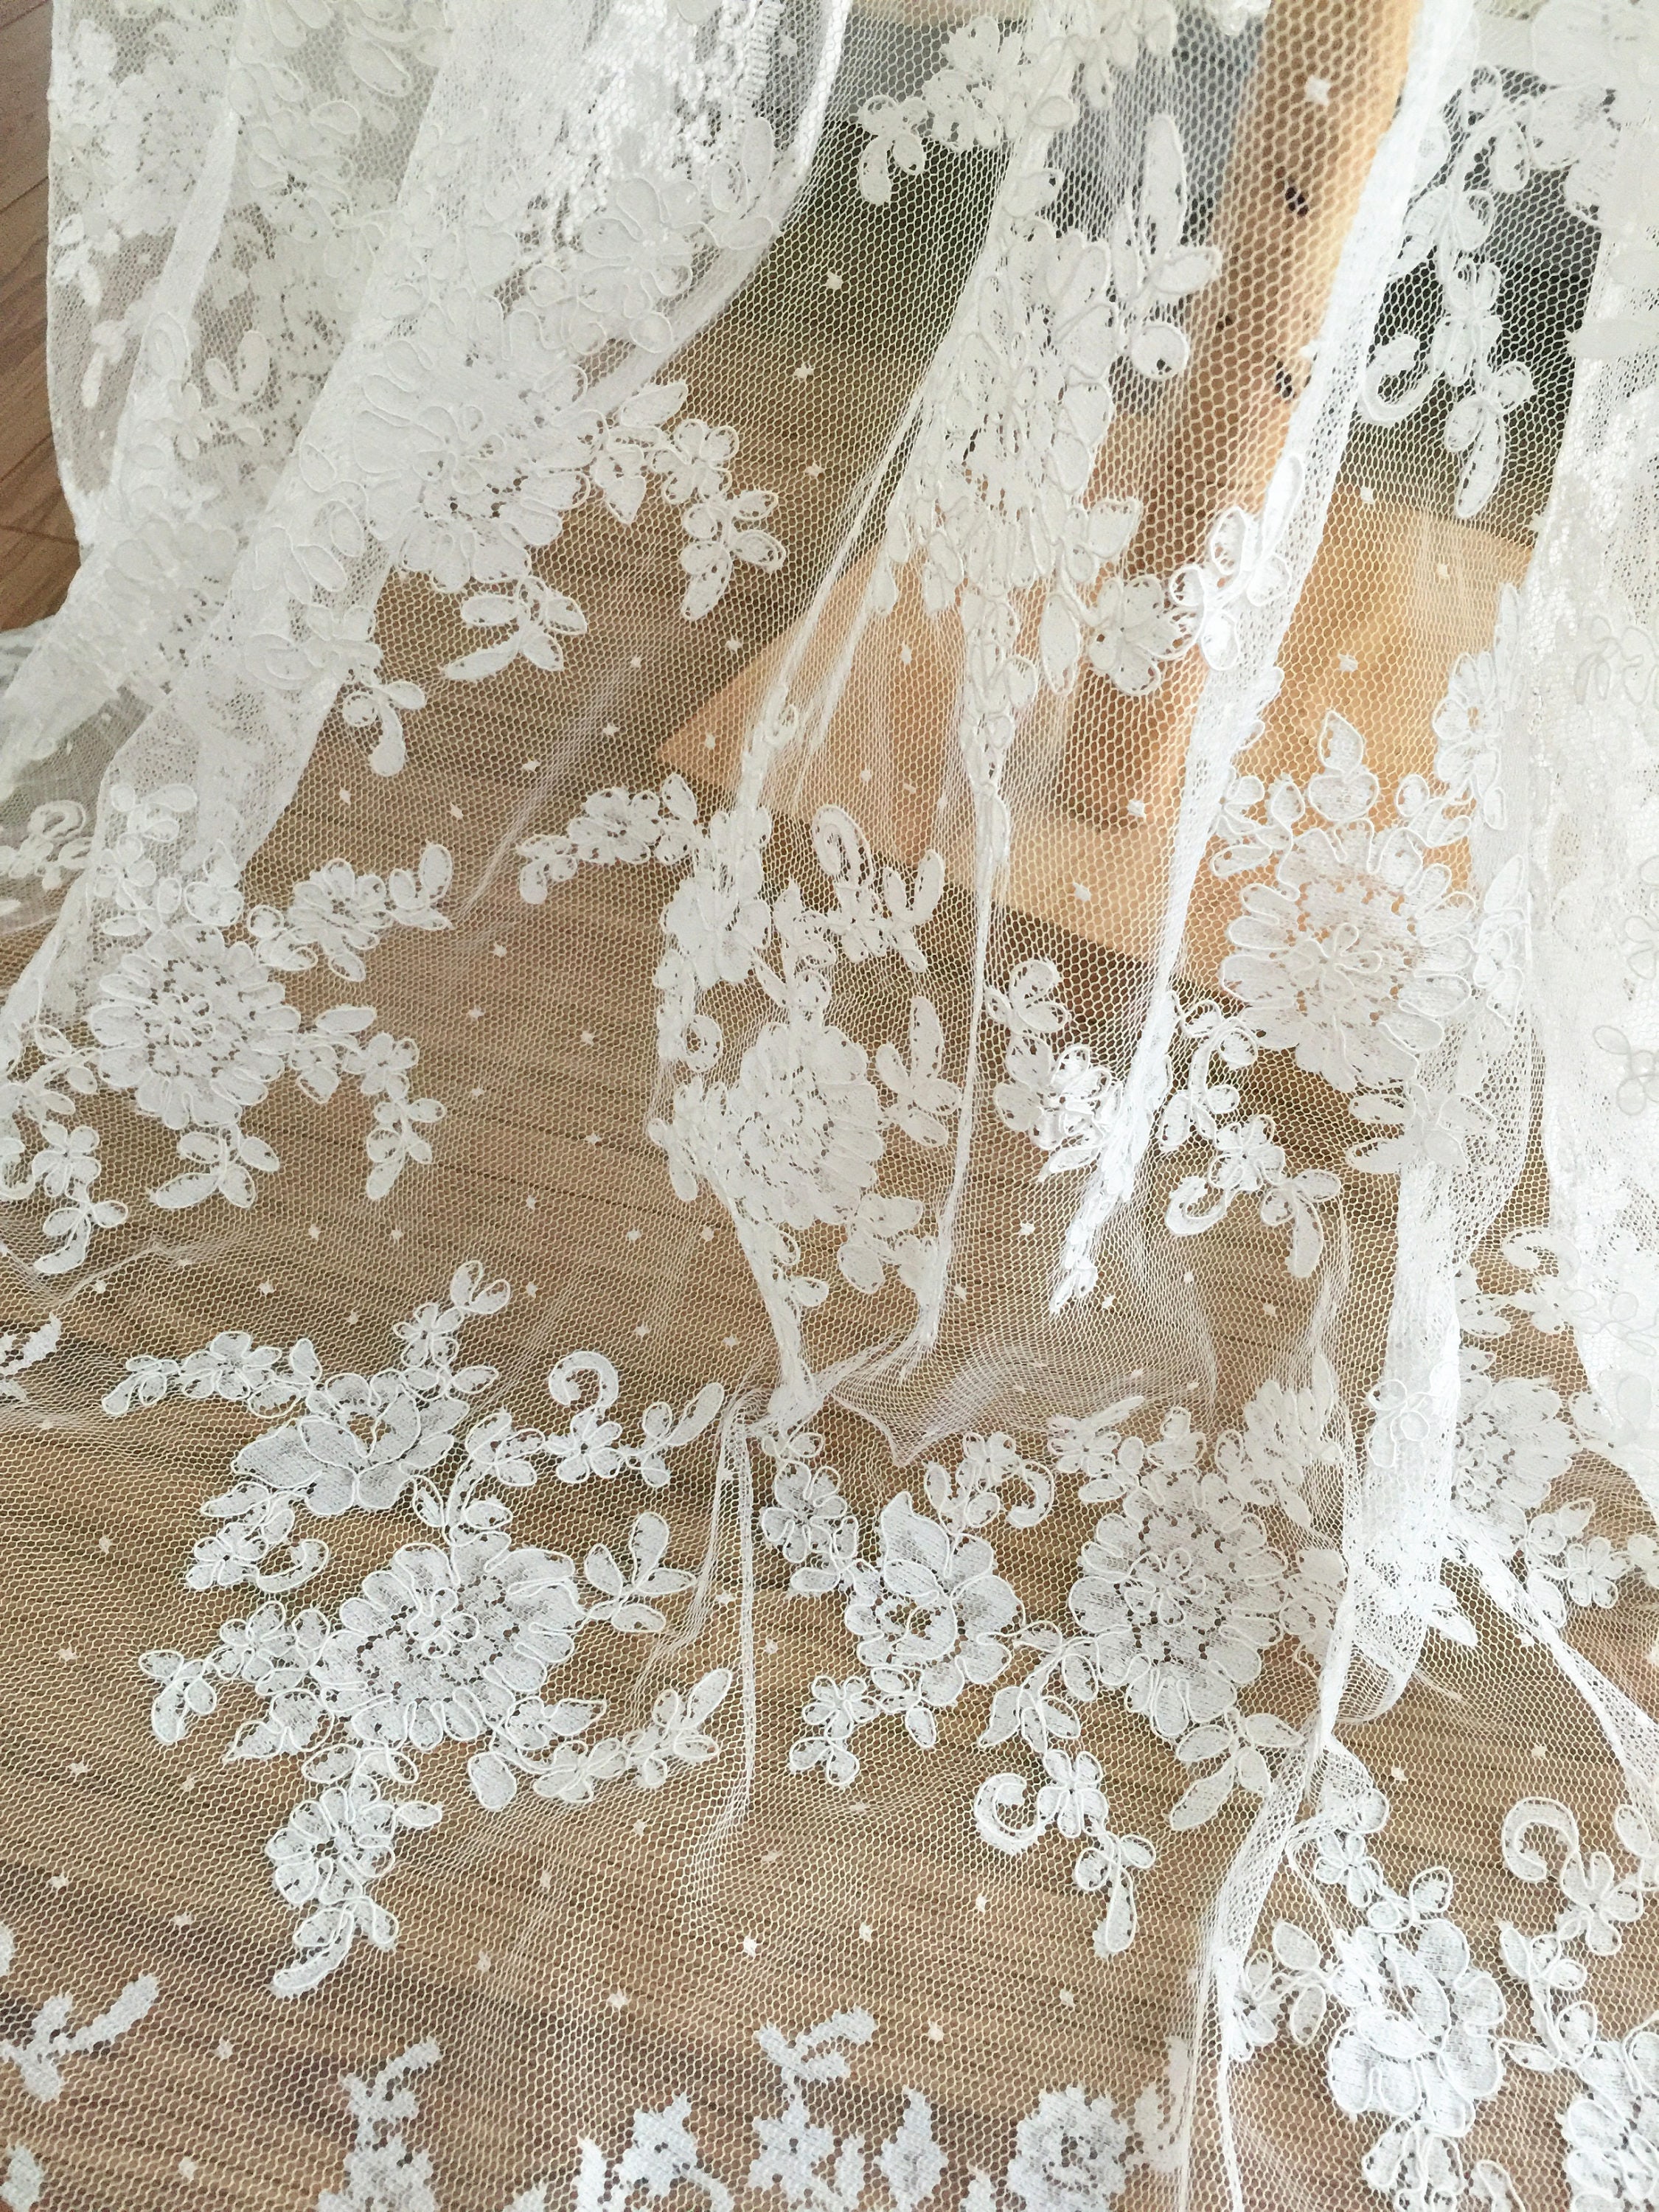 Dotted Bridal Alencon Lace Fabric by Yard in Ivory for Wedding - Etsy